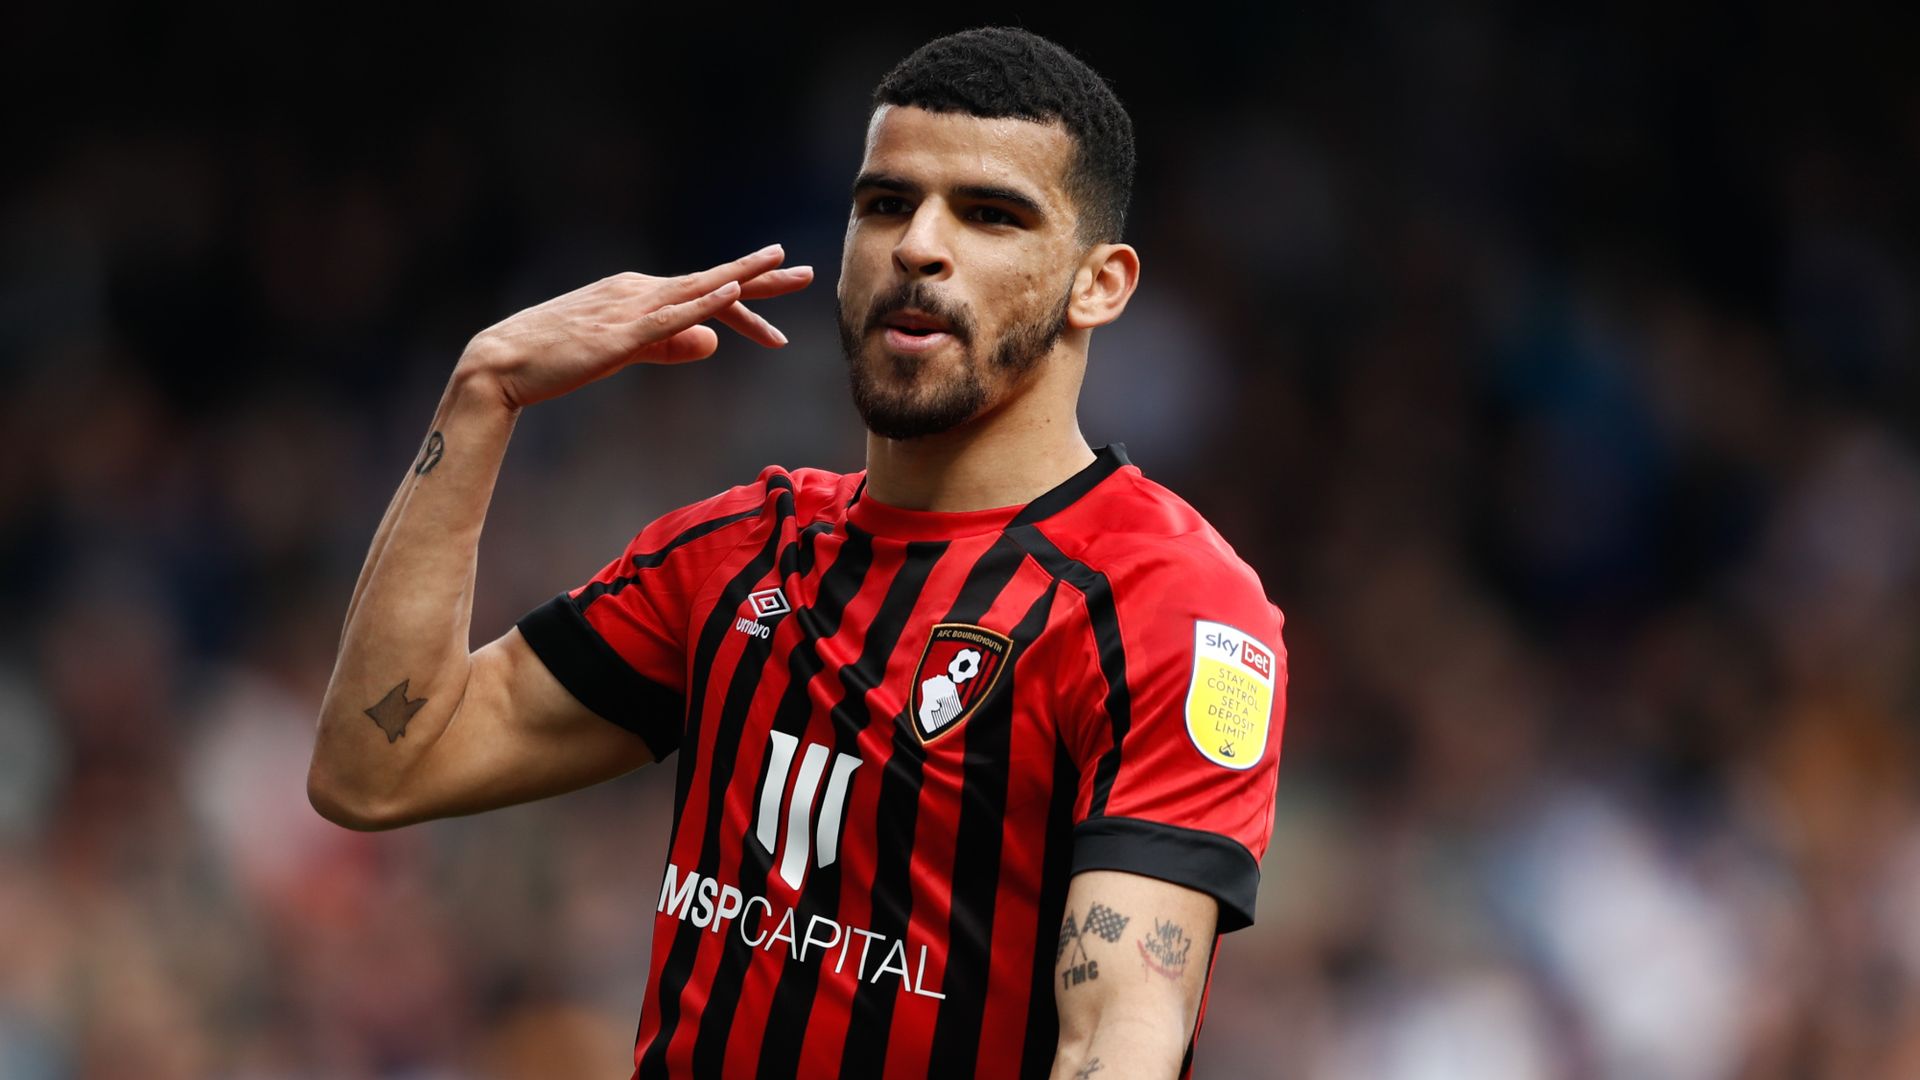 Bournemouth ease past Blackburn & end Rovers' play-off chances